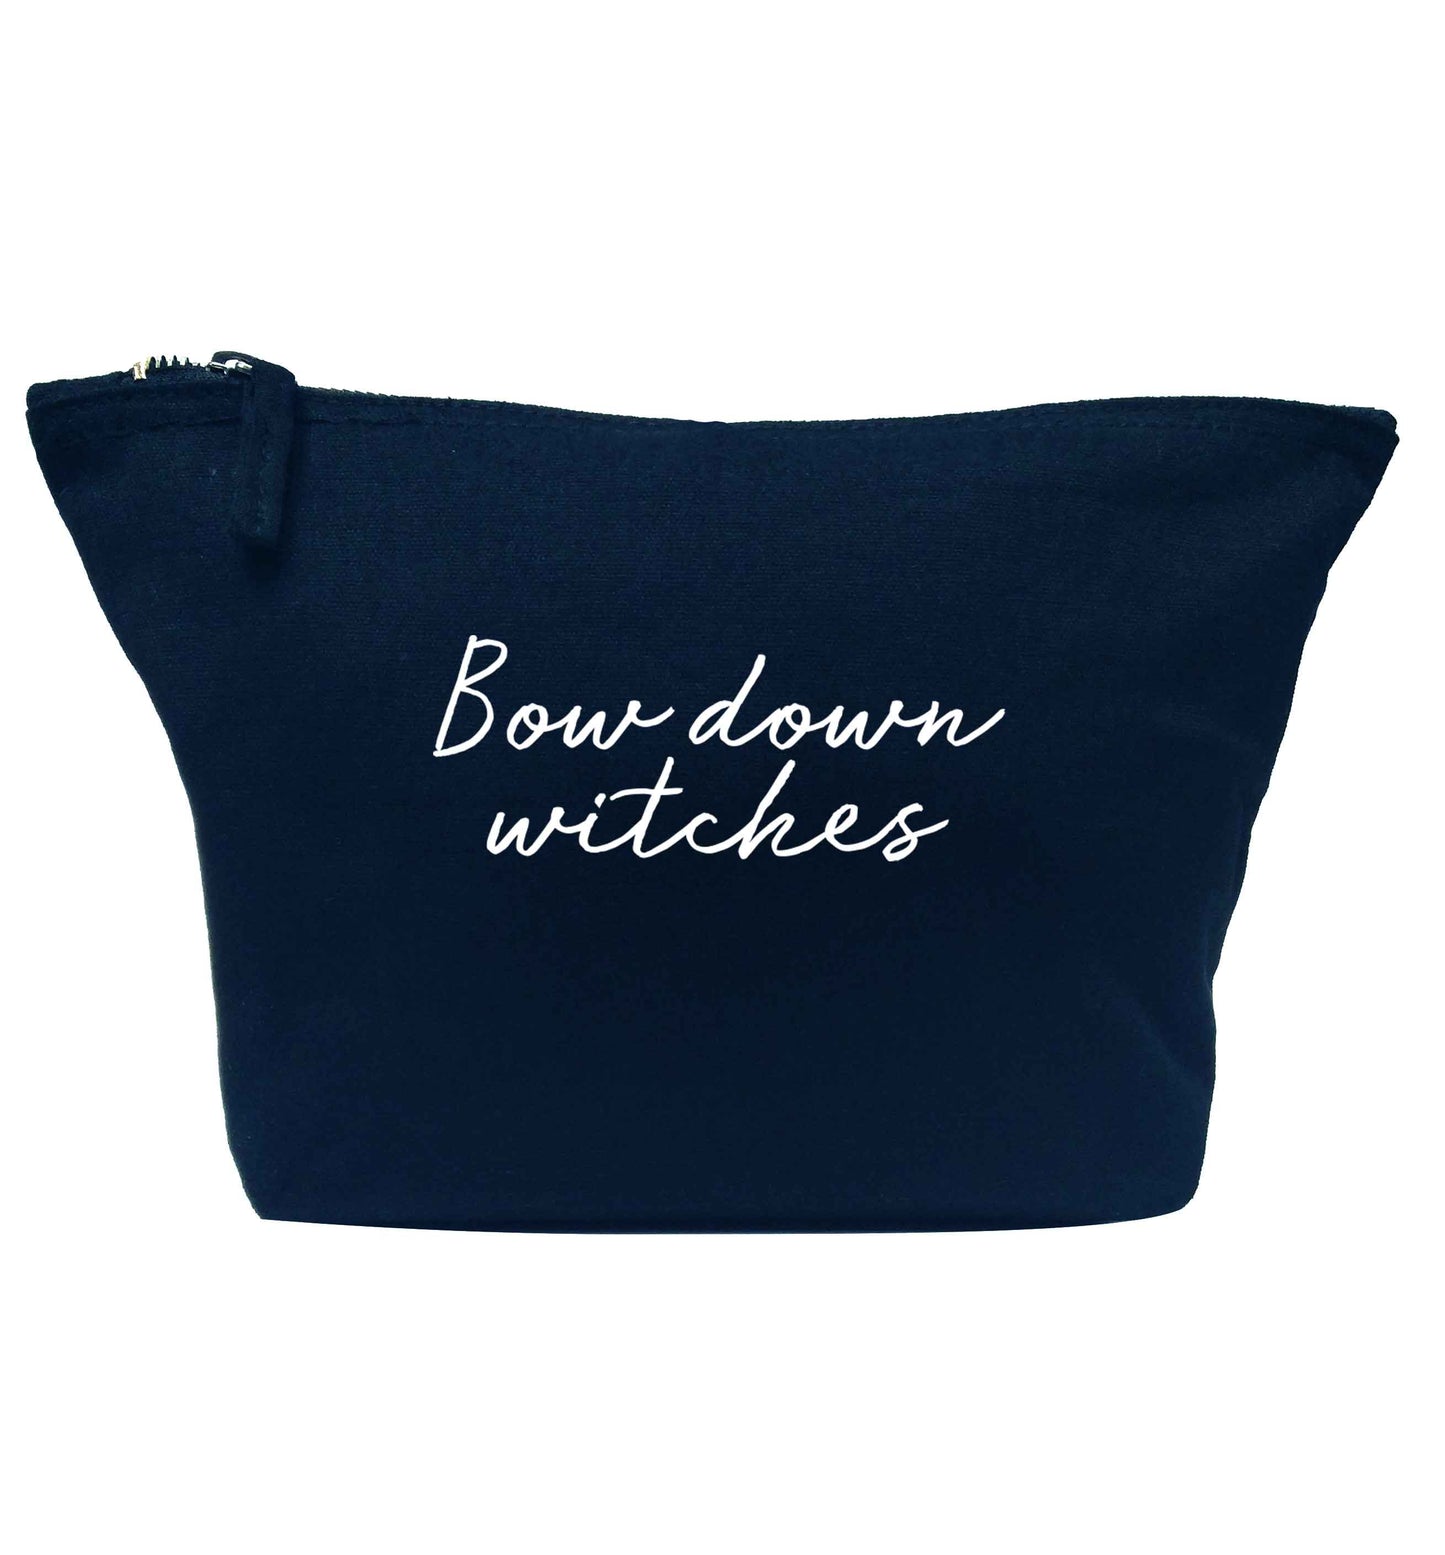 Bow down witches navy makeup bag